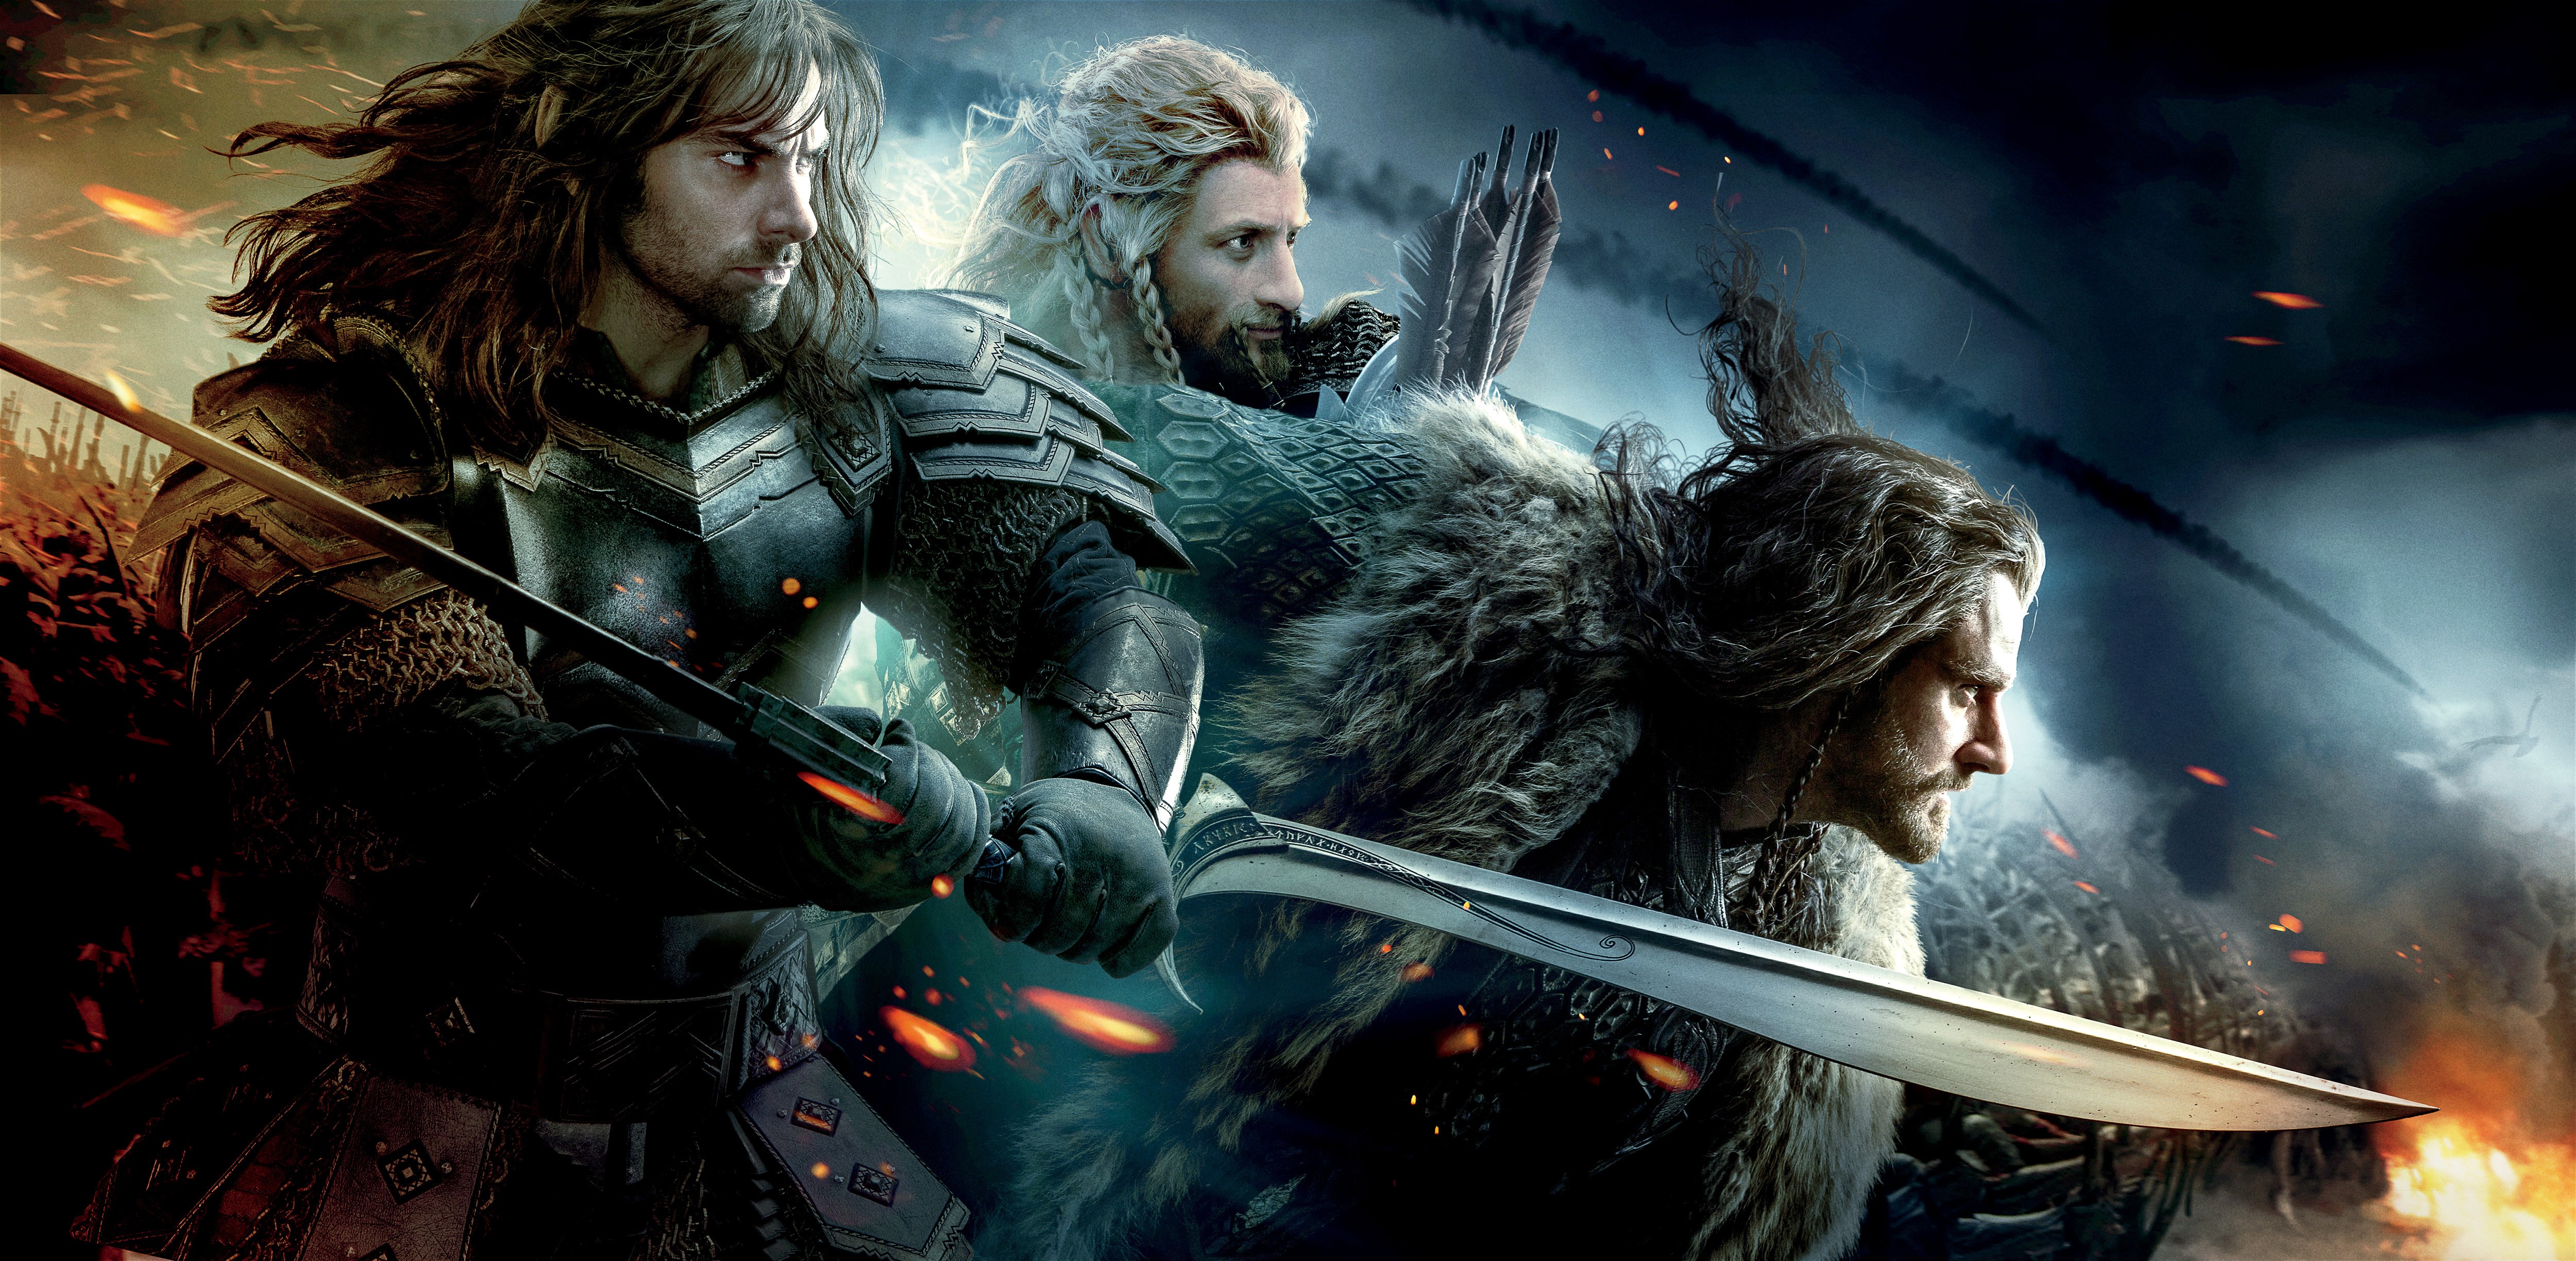 Movies The Hobbit The Hobbit The Battle Of The Five Armies Thorin Oakenshield Dwarfs 5000x2448